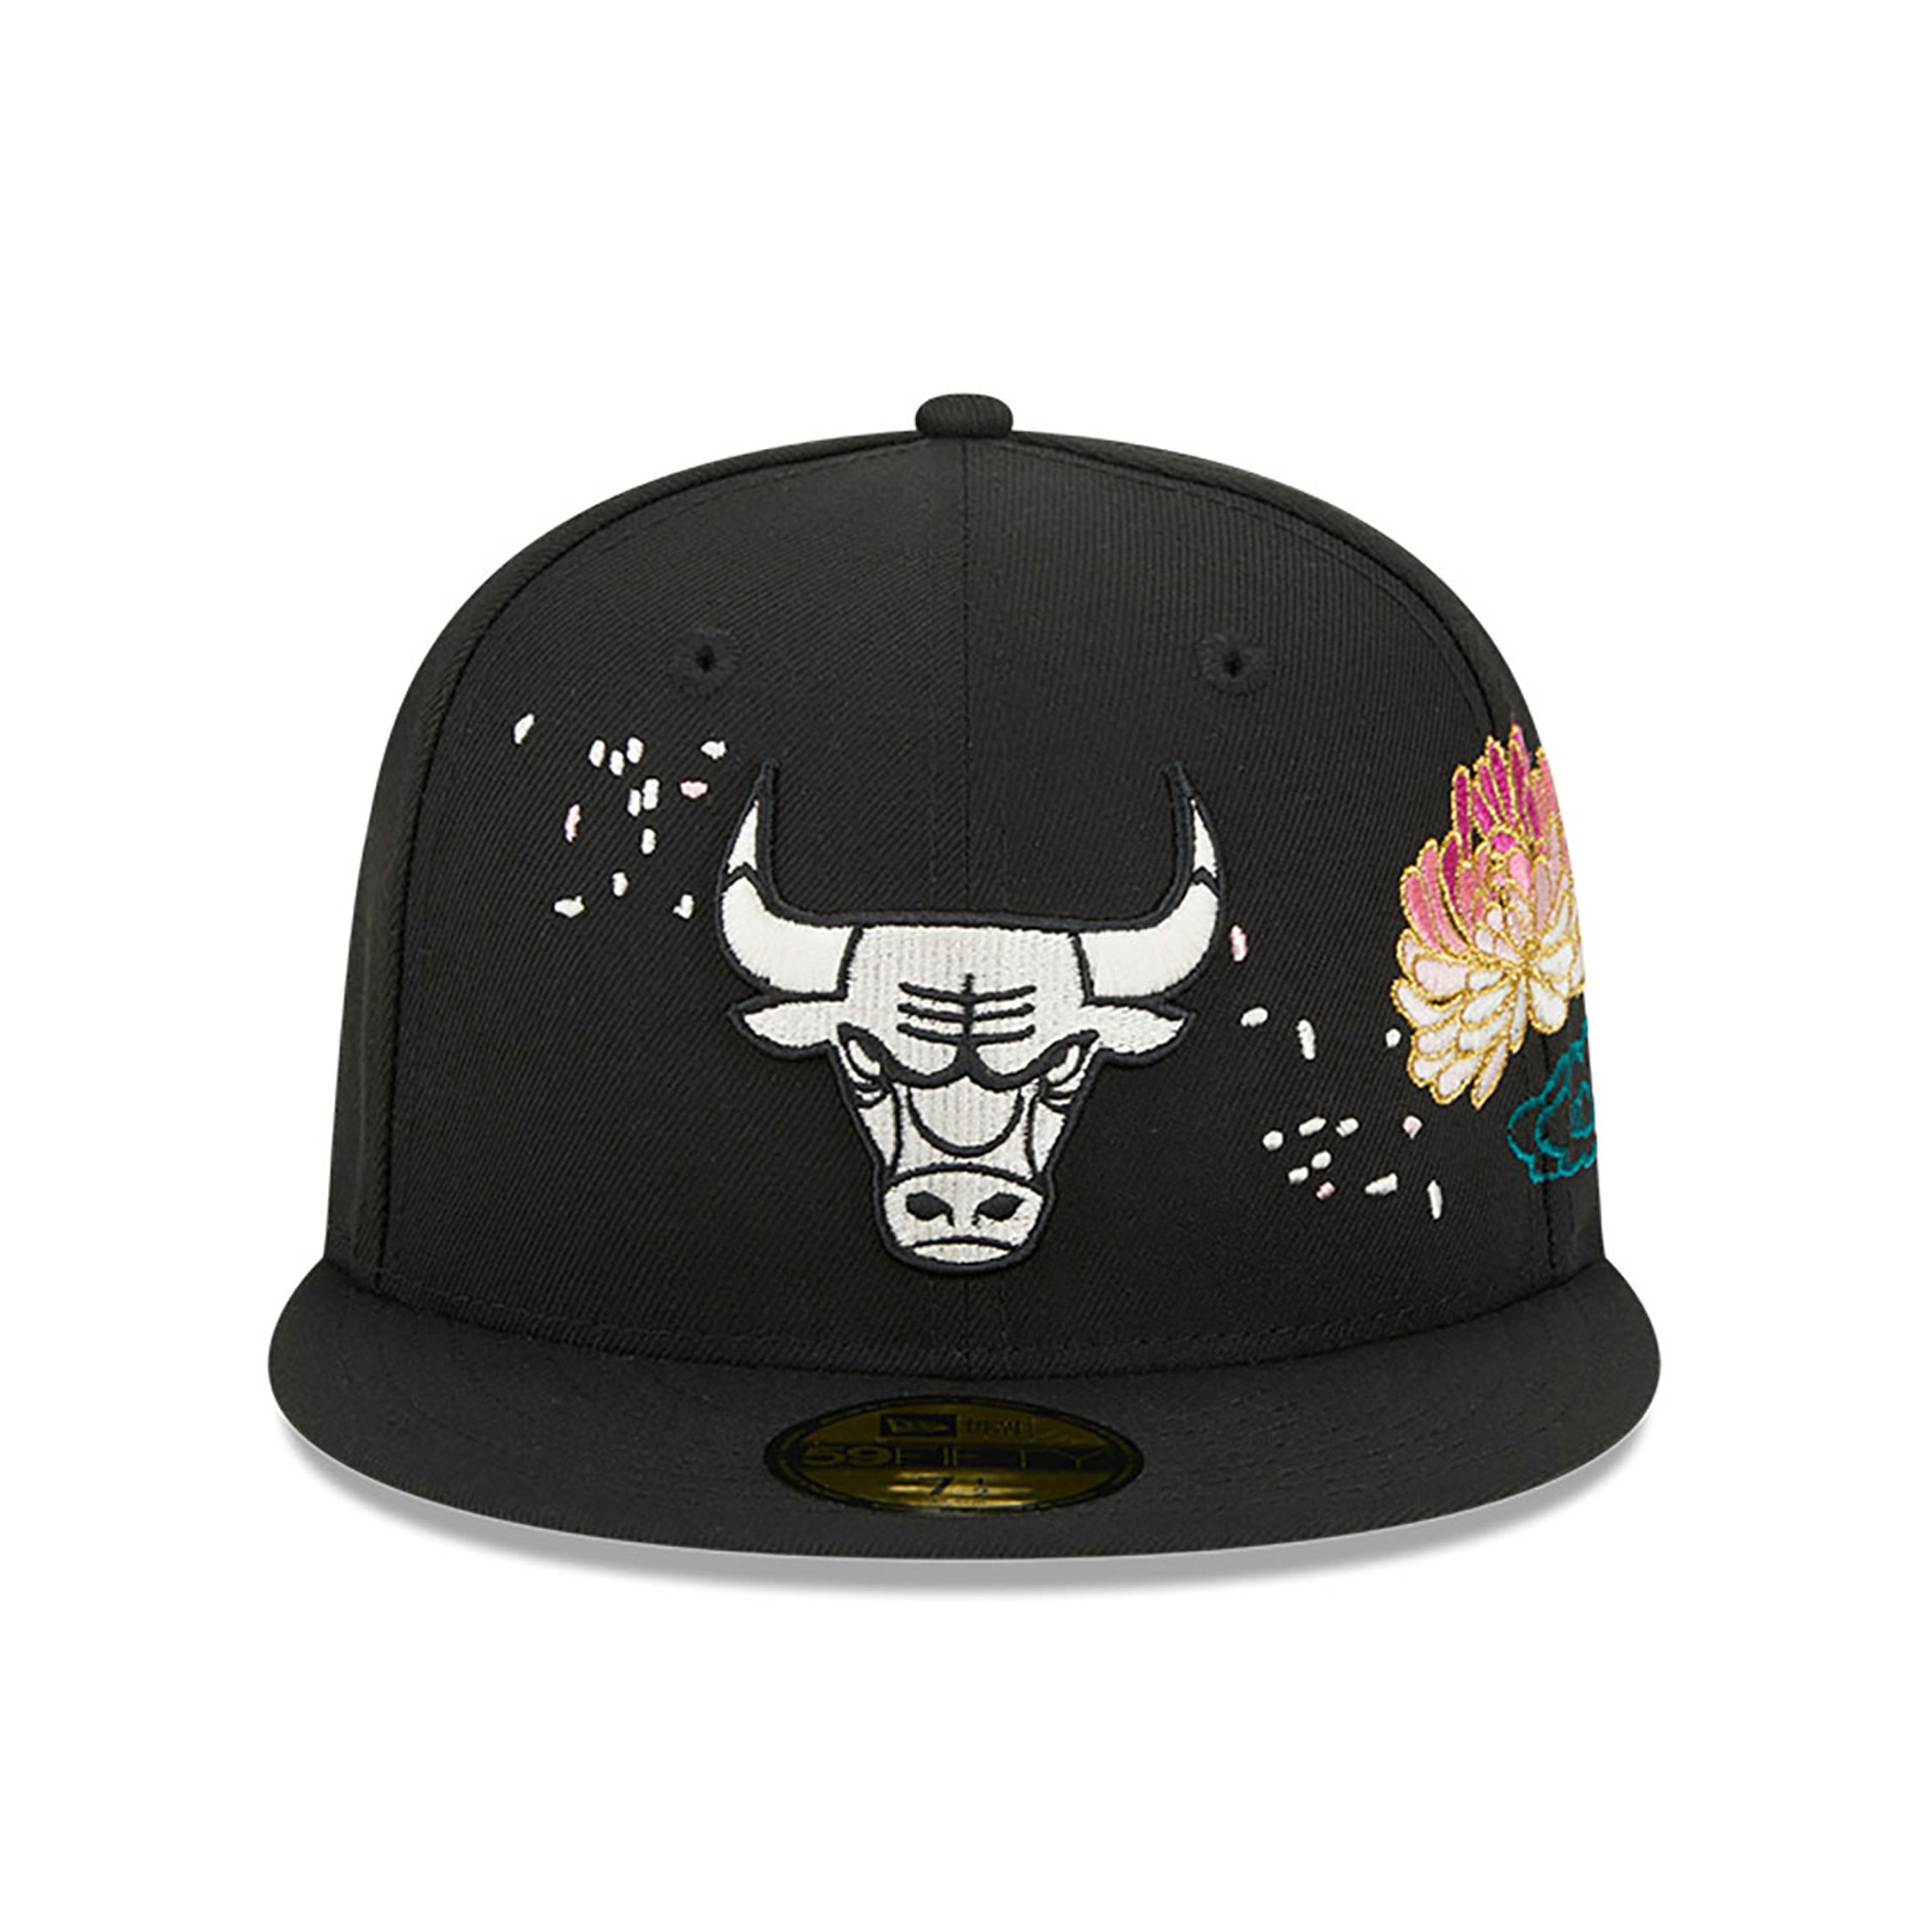 Chicago Bulls Cherry Blossom Black 59FIFTY Fitted Cap